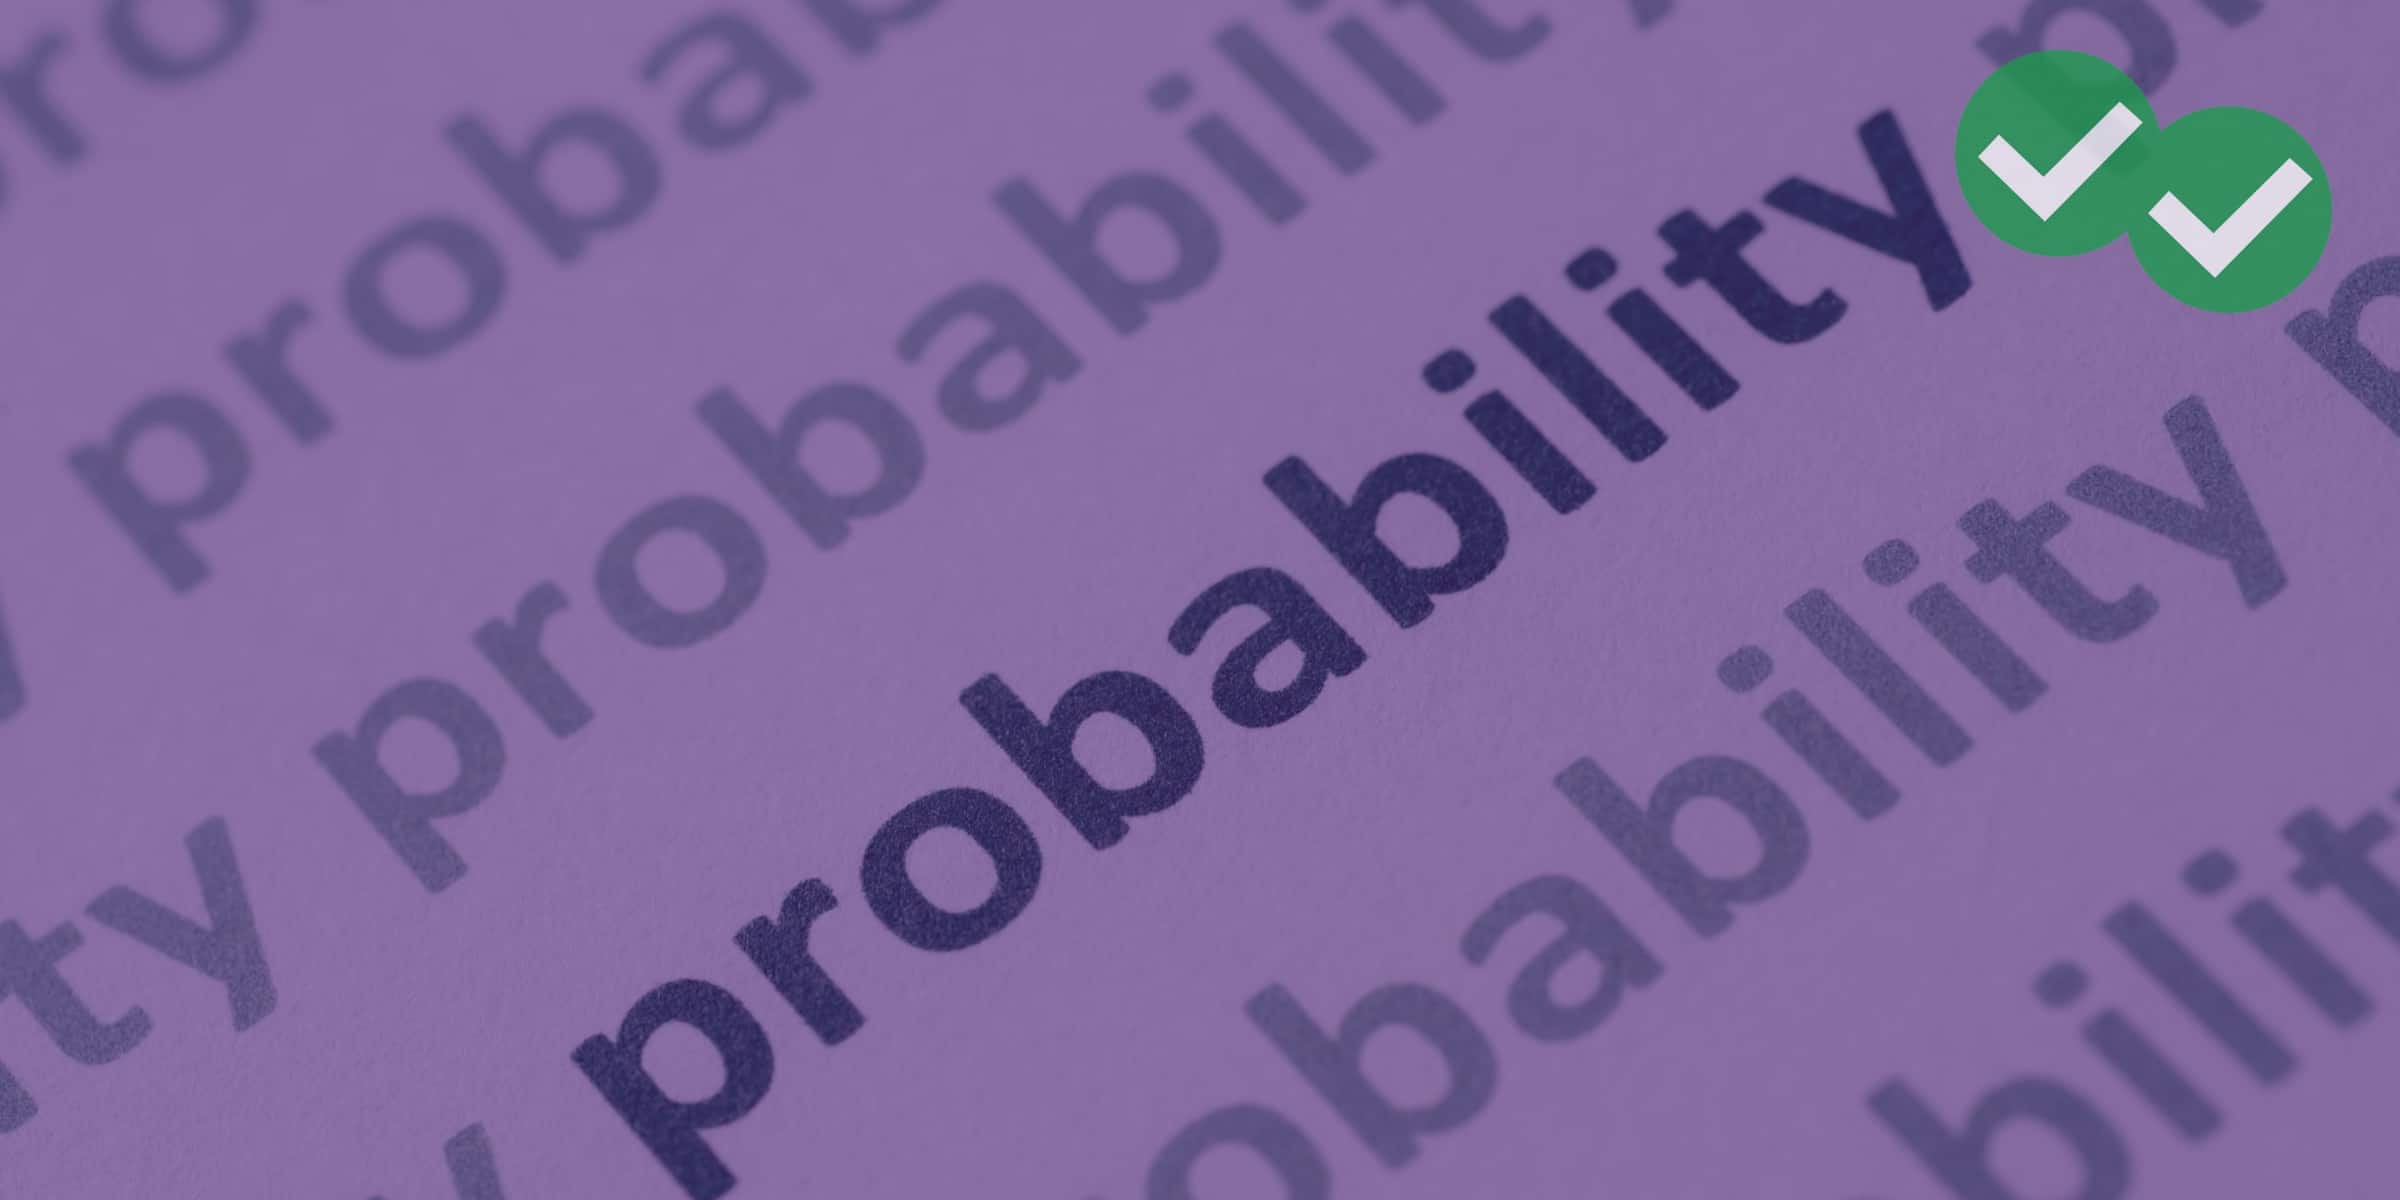 A piece of paper with the word "probability" written on it several times